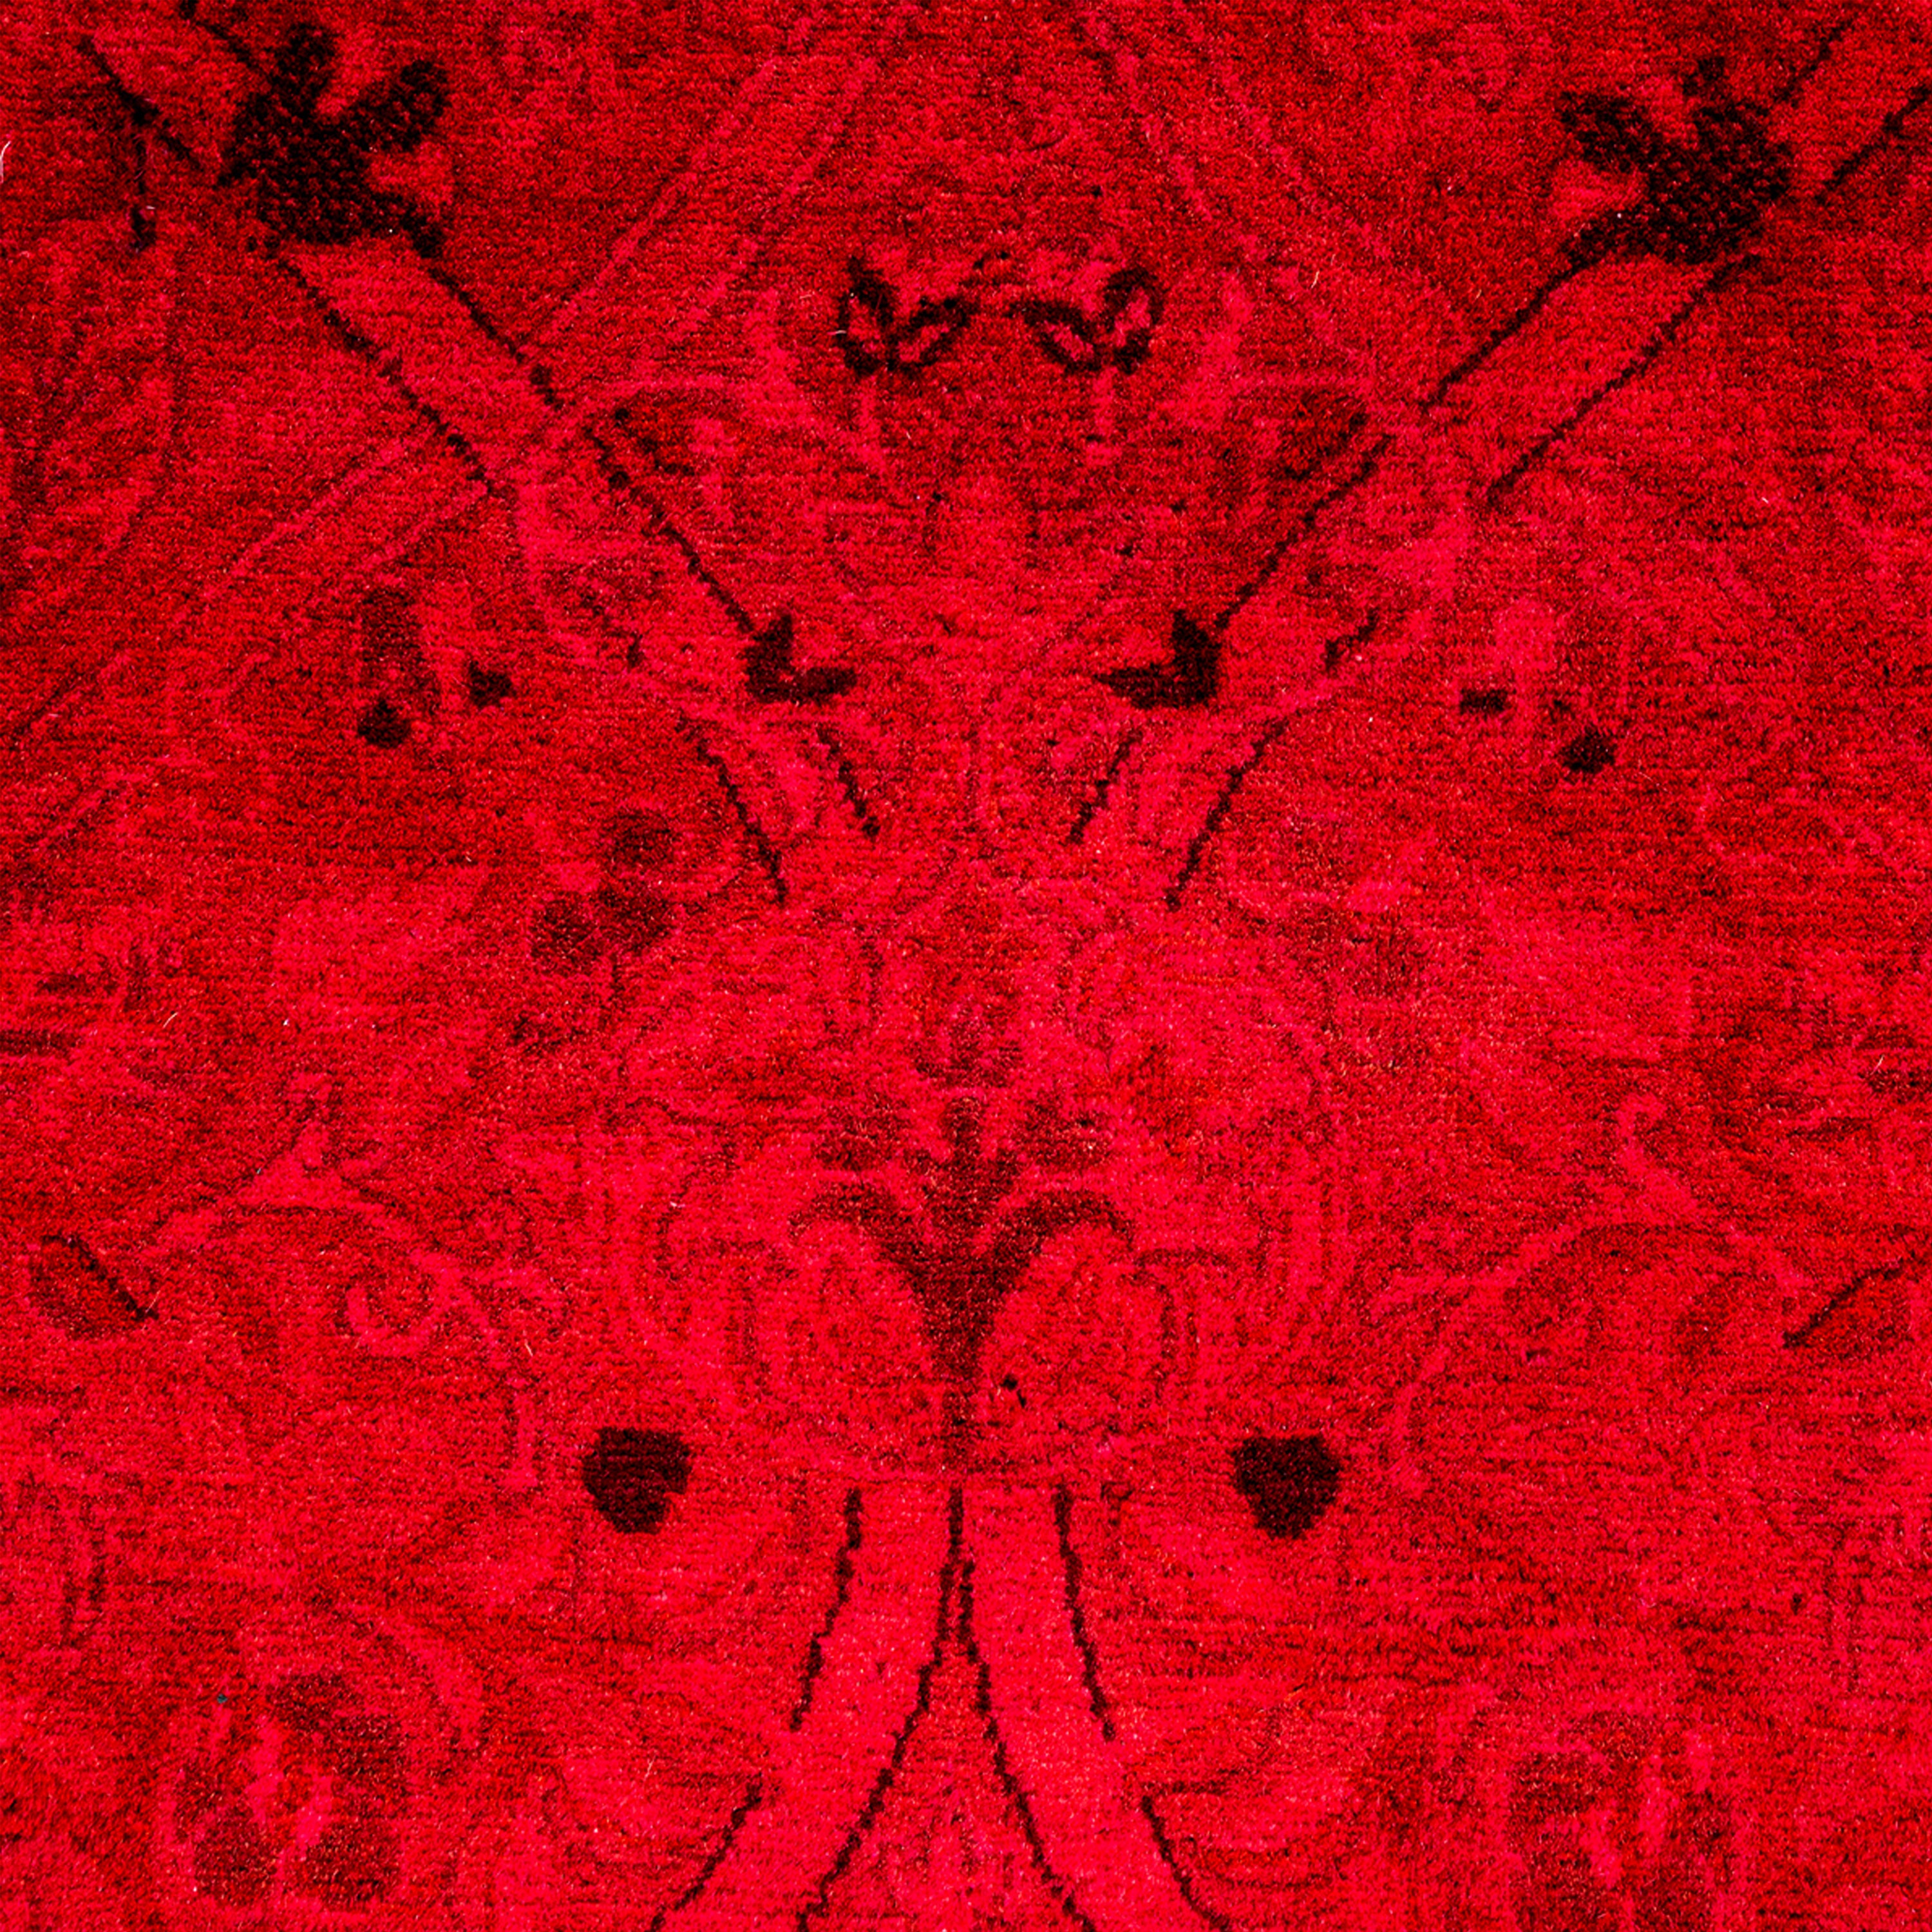 Red Overdyed Wool Rug - 6' 2" x 9' 2"